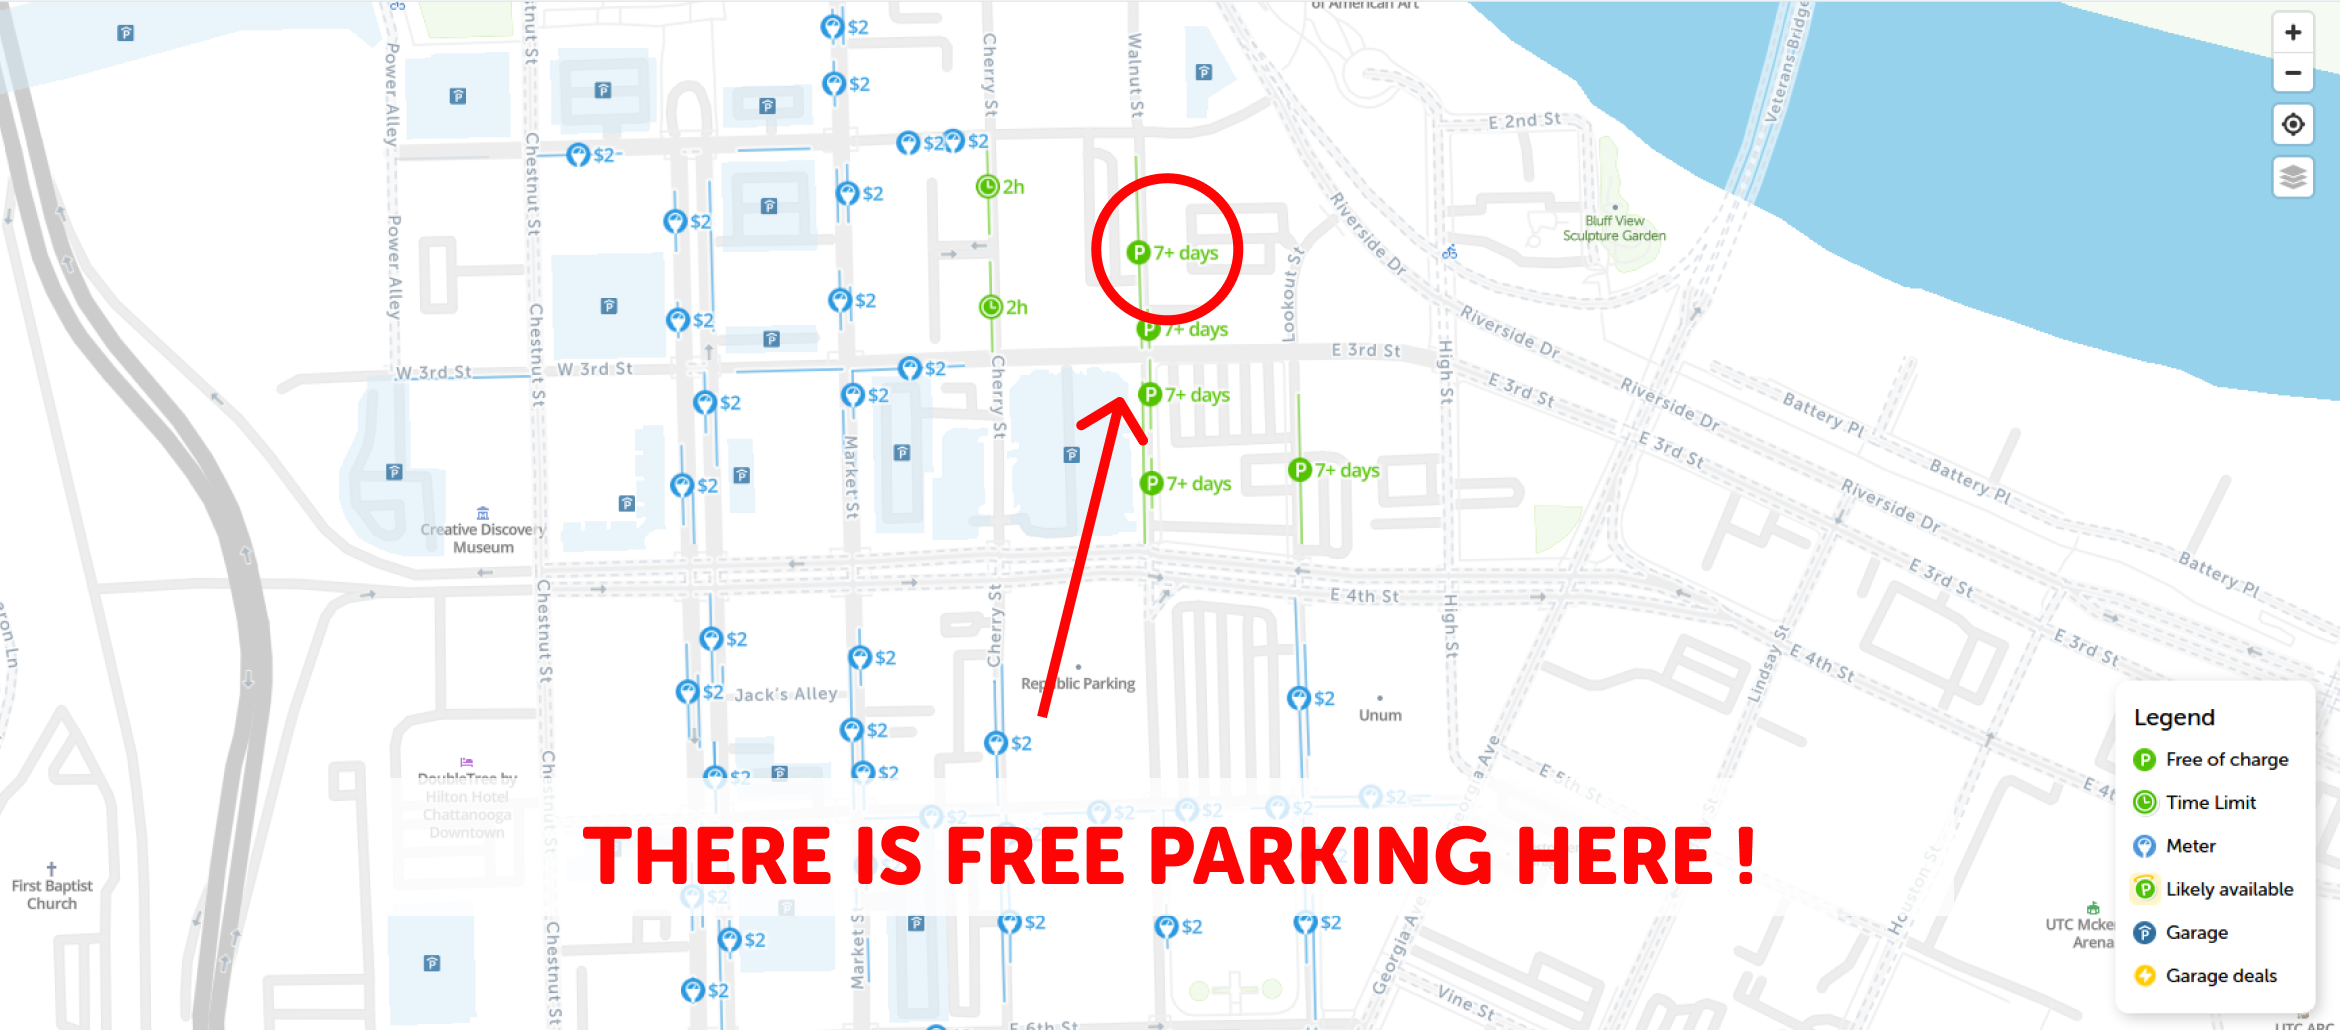 map of free parking in Chattanooga - SpotAngels